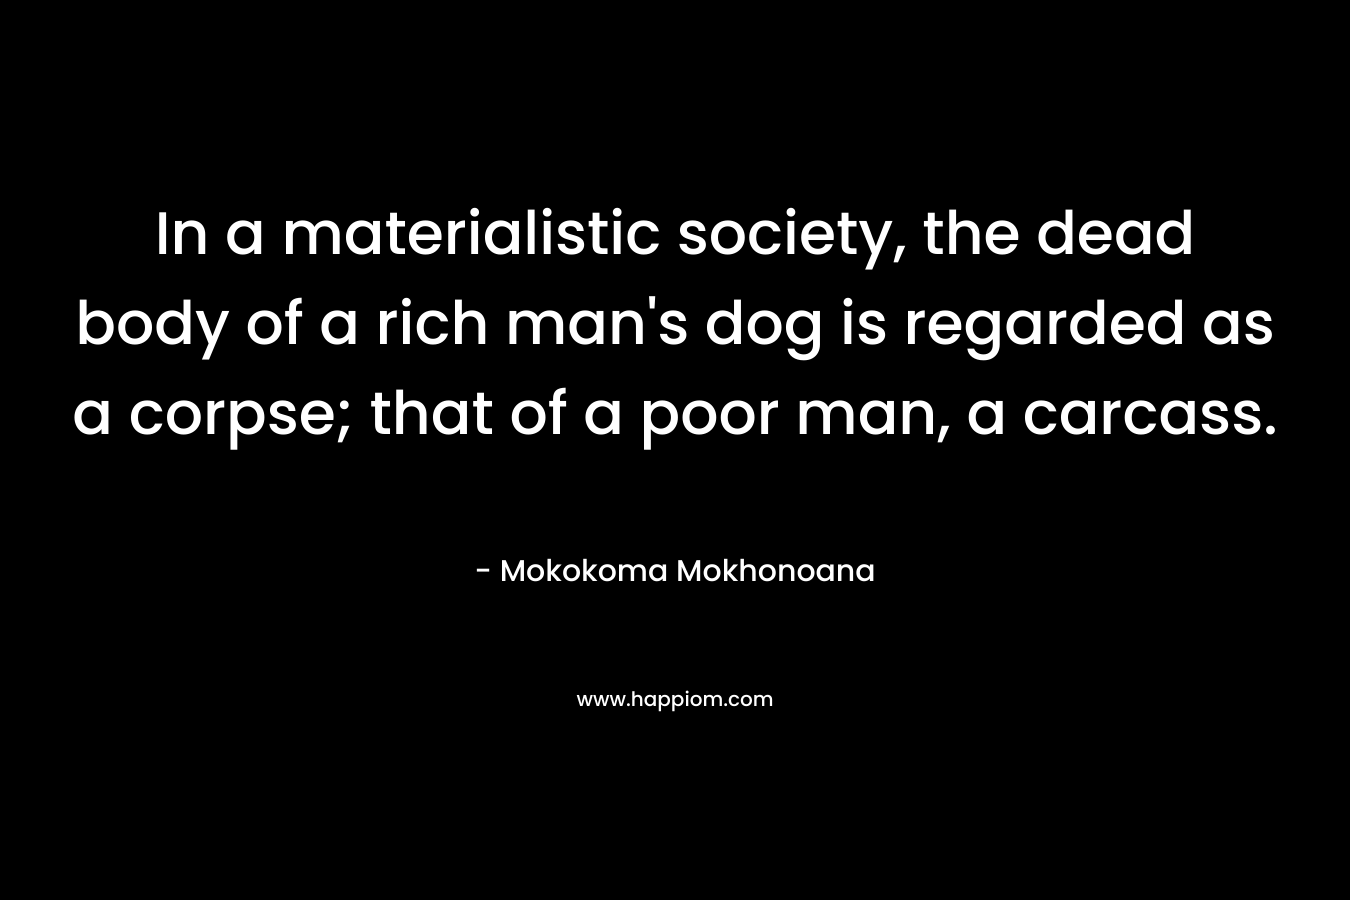 In a materialistic society, the dead body of a rich man's dog is regarded as a corpse; that of a poor man, a carcass.